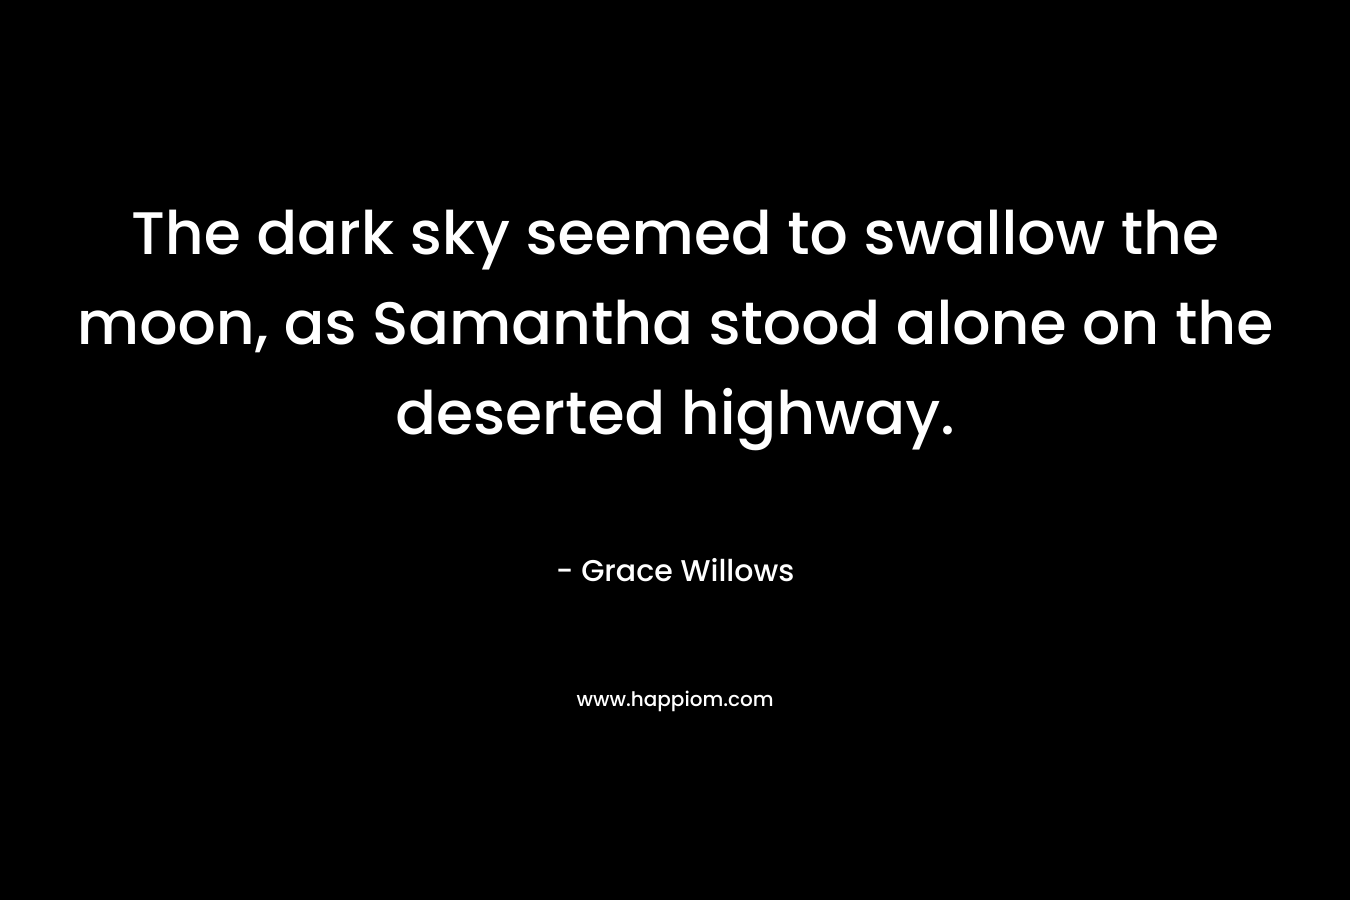 The dark sky seemed to swallow the moon, as Samantha stood alone on the deserted highway.